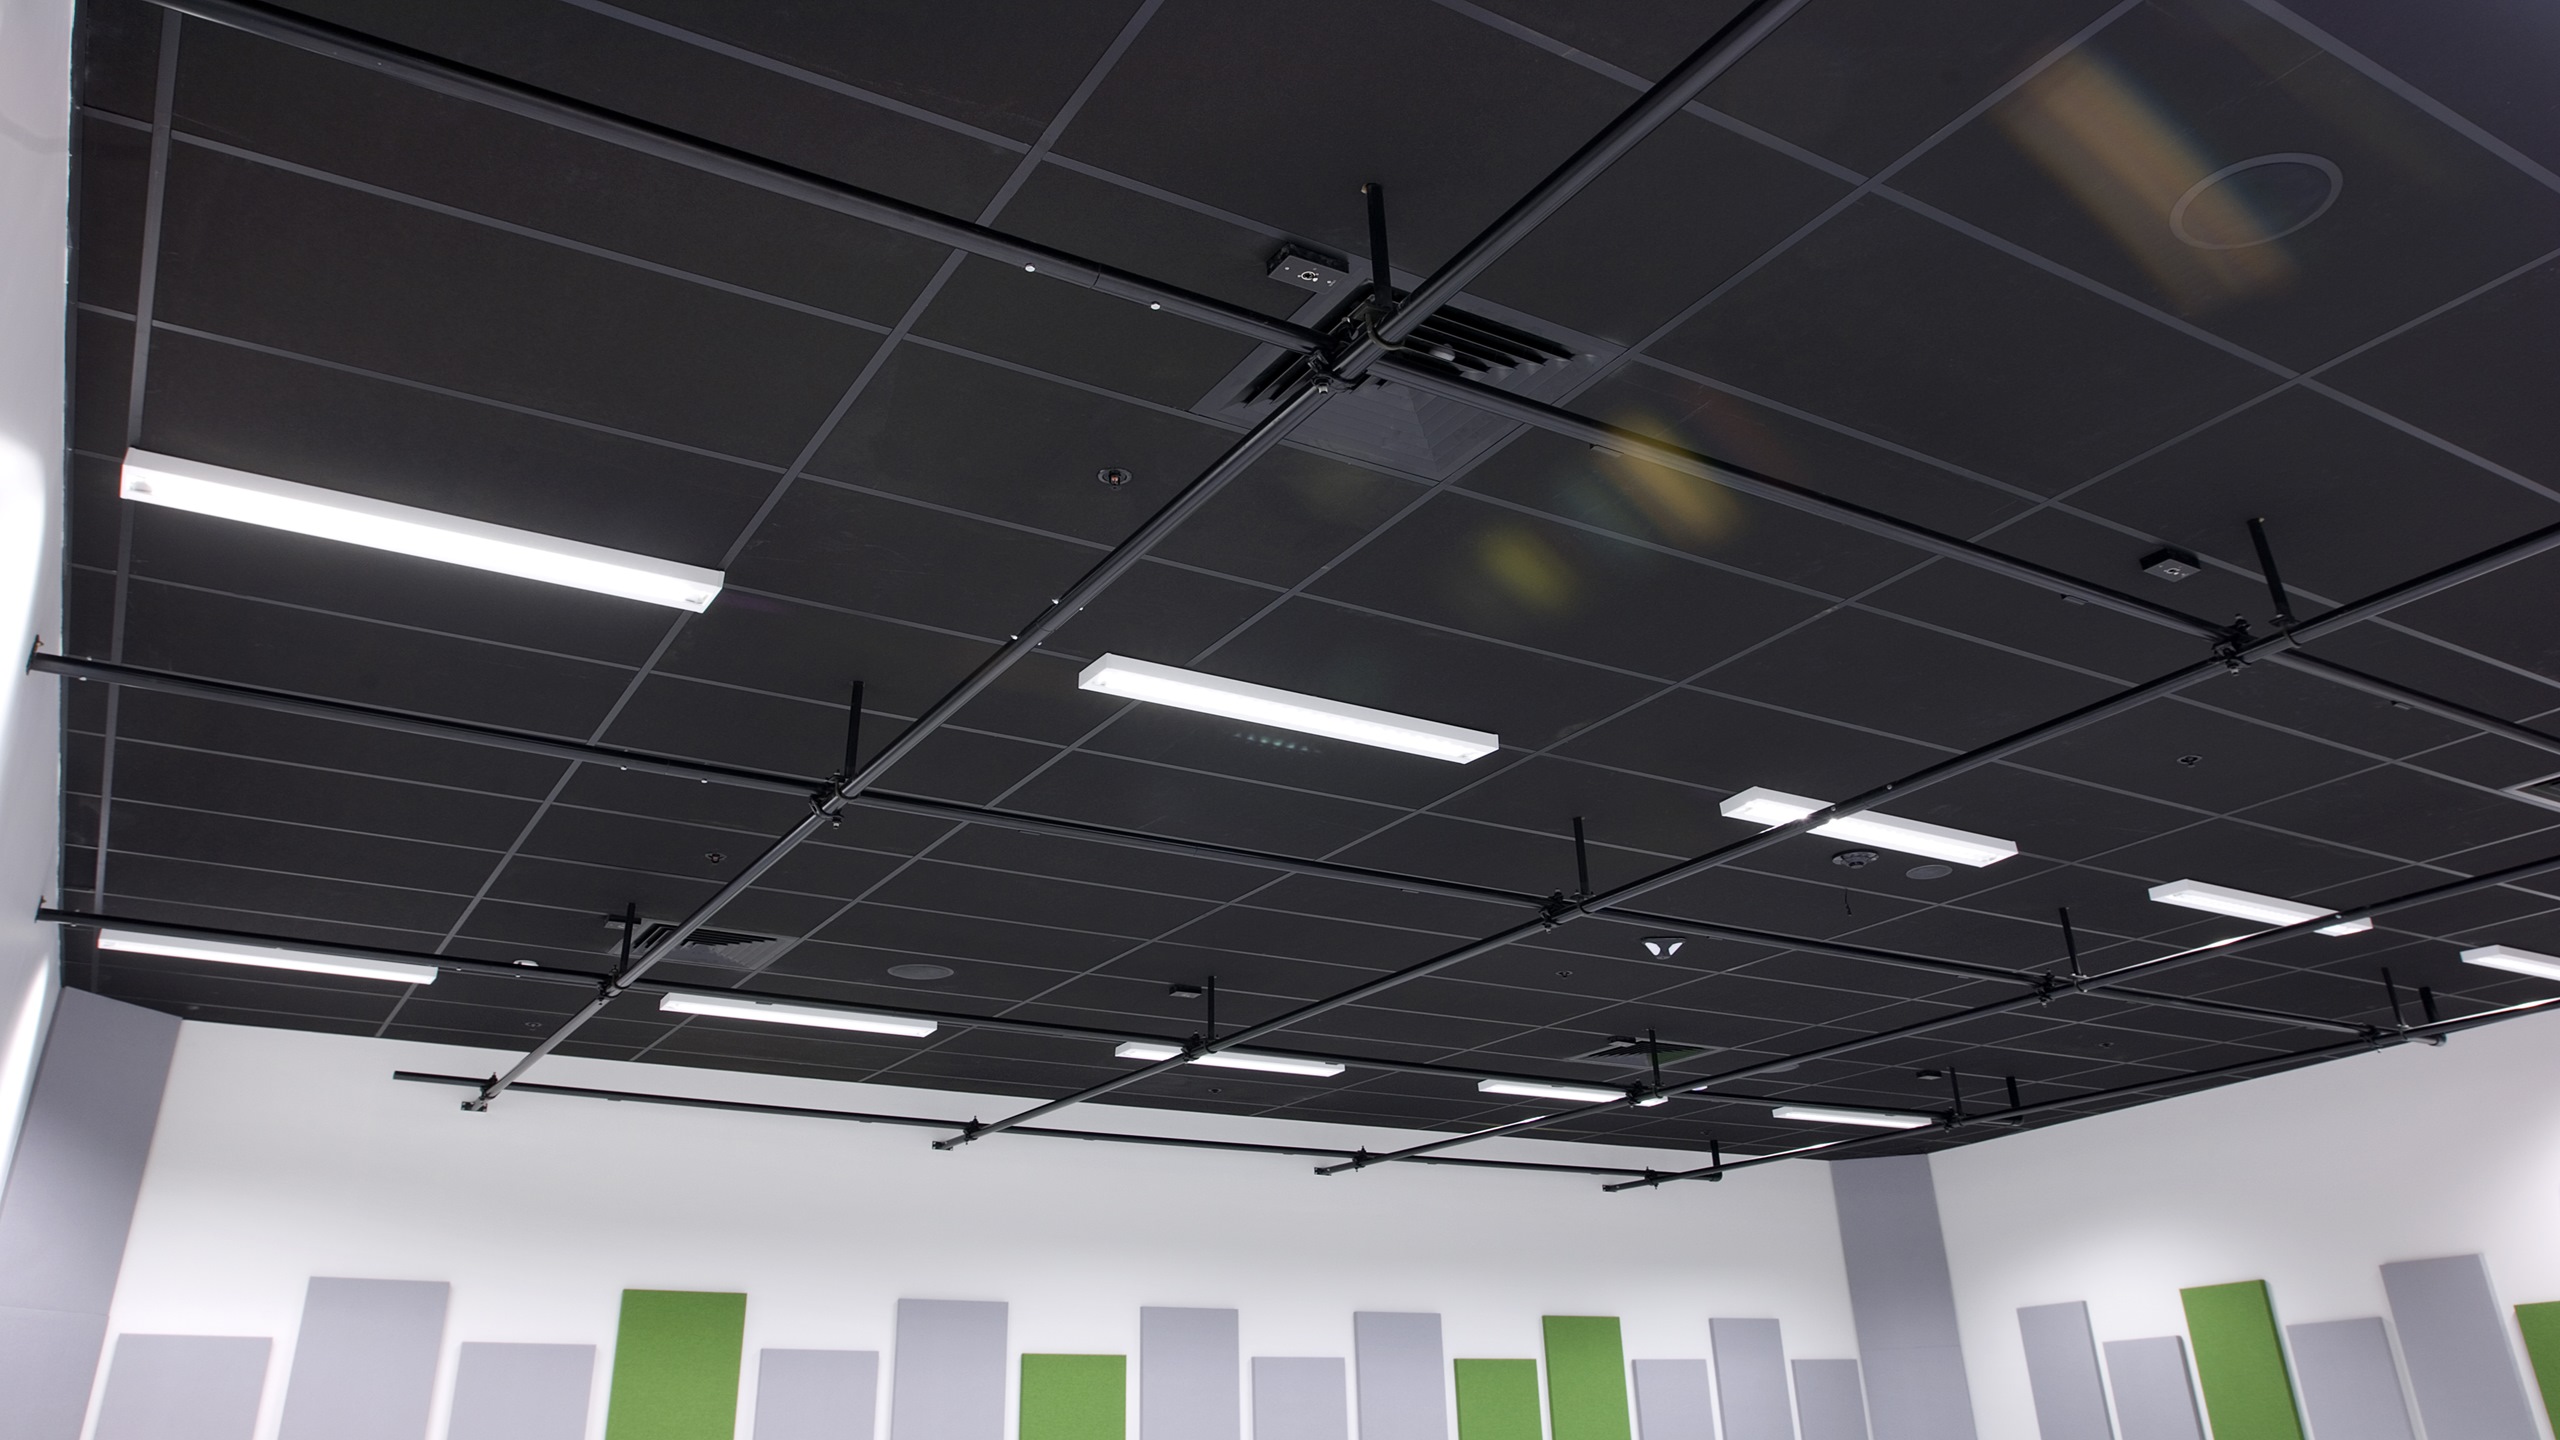 Hobsonville Point Intermediate music room showing a detailed section of the Avant 25 theatre Black ceiling installed into a grid & tile system.